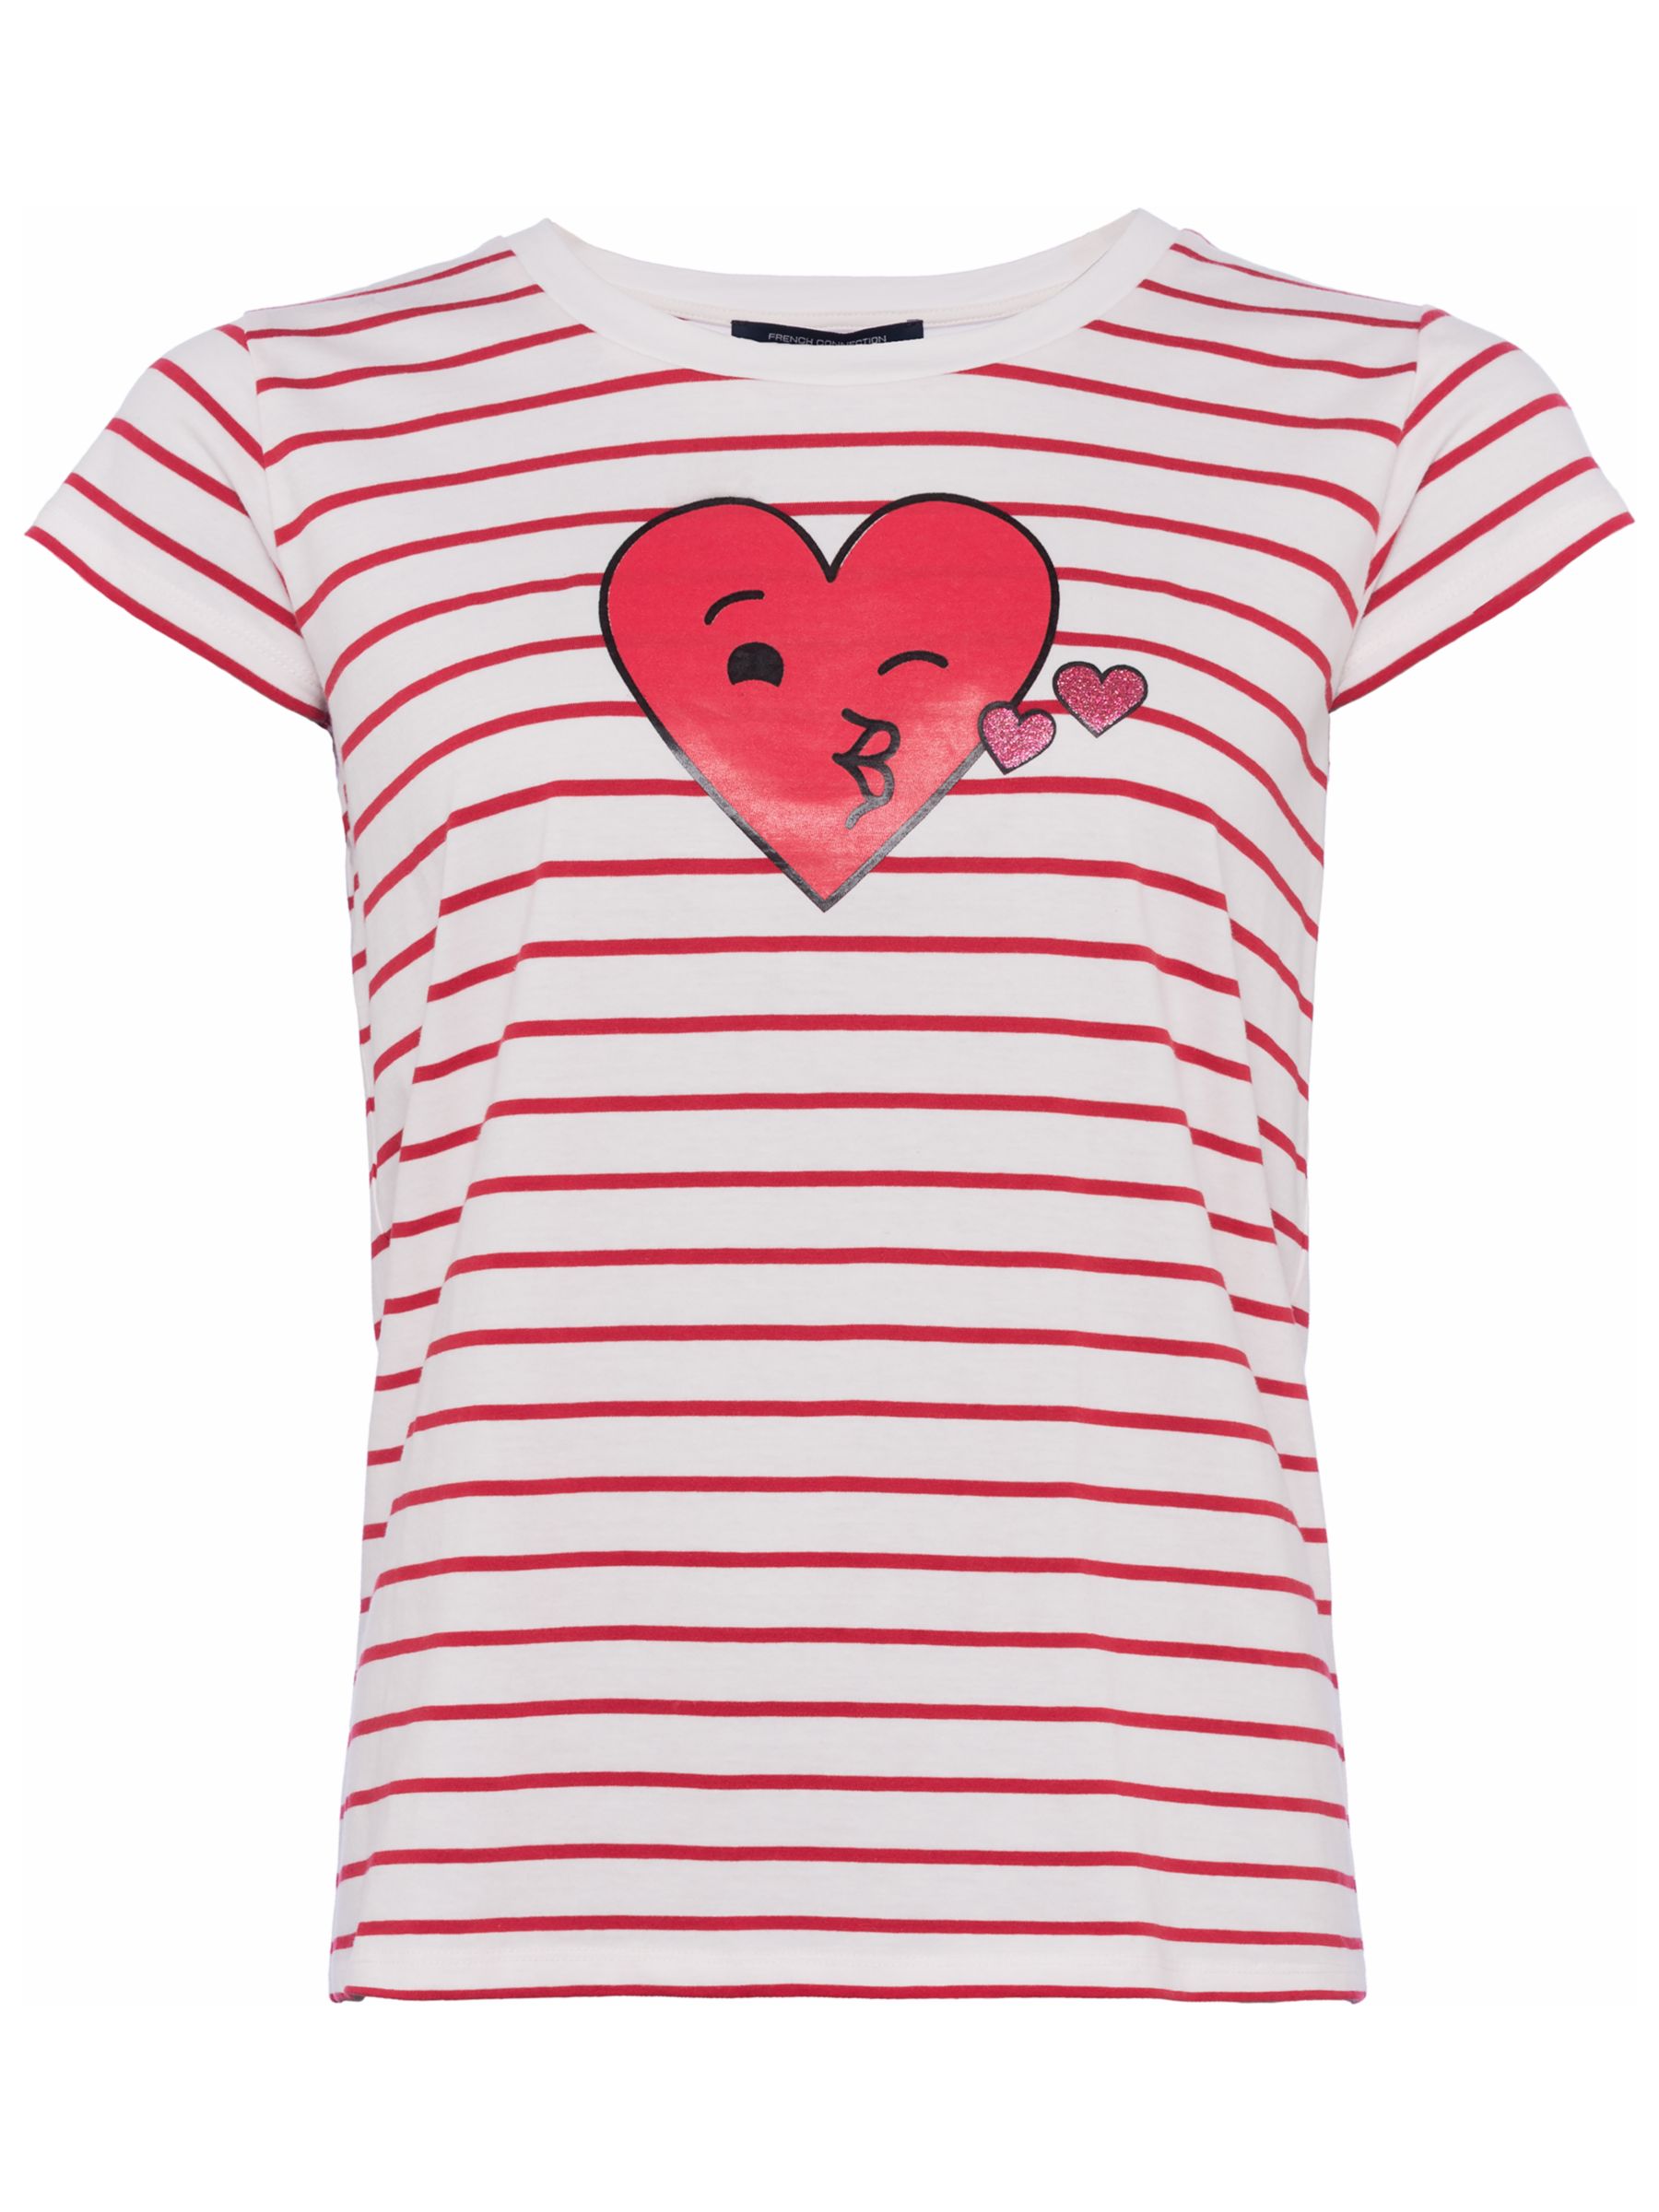 white shirt with red hearts